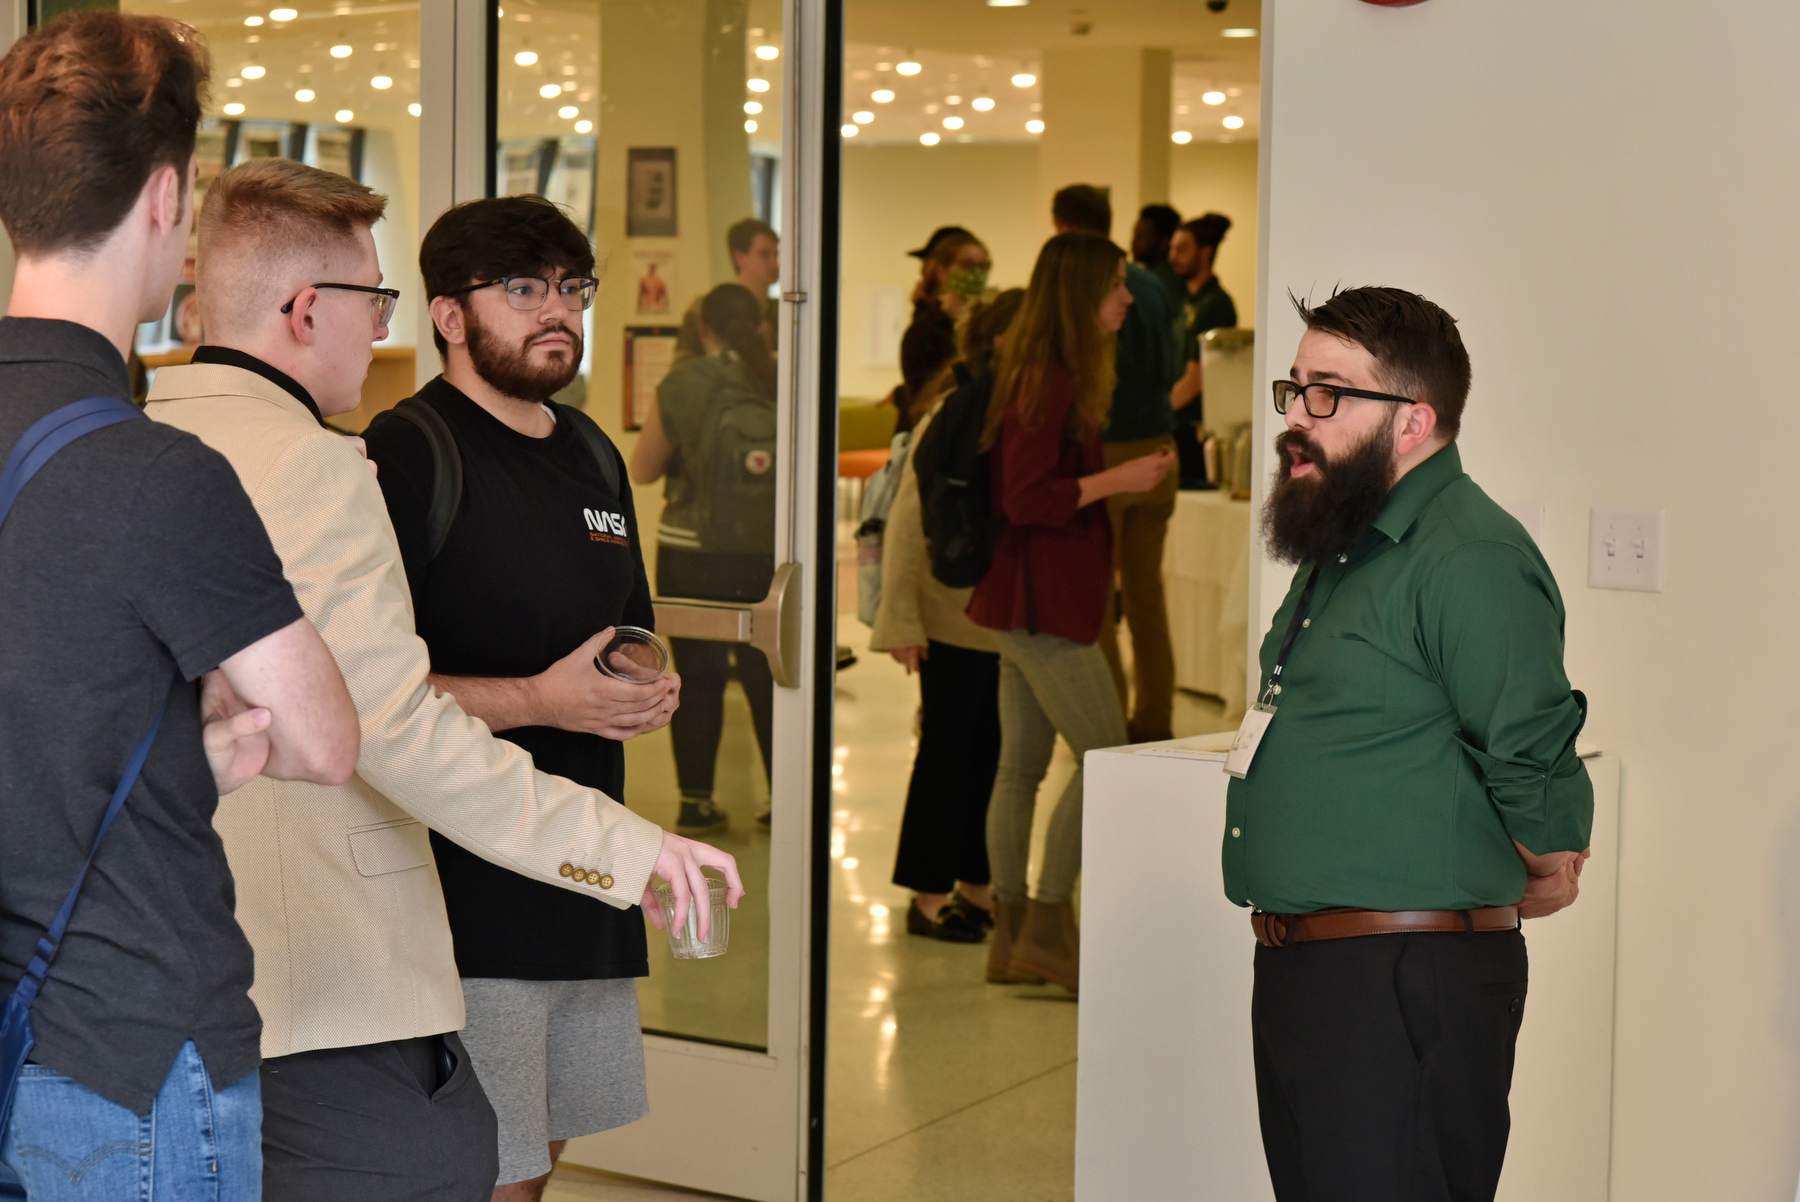 Students attending the Media Summit had the opportunity to talk with alumni professionals during the Career Connectors event held in Tyler Art Gallery after the panel discussion. Pictured talking with a group of current students is Paul Andrew Esden Jr (at right), a 2015 broadcasting and mass communication graduate now co-host of "The Manchild Show with Boy Green" on The Score 1260 in Syracuse. 